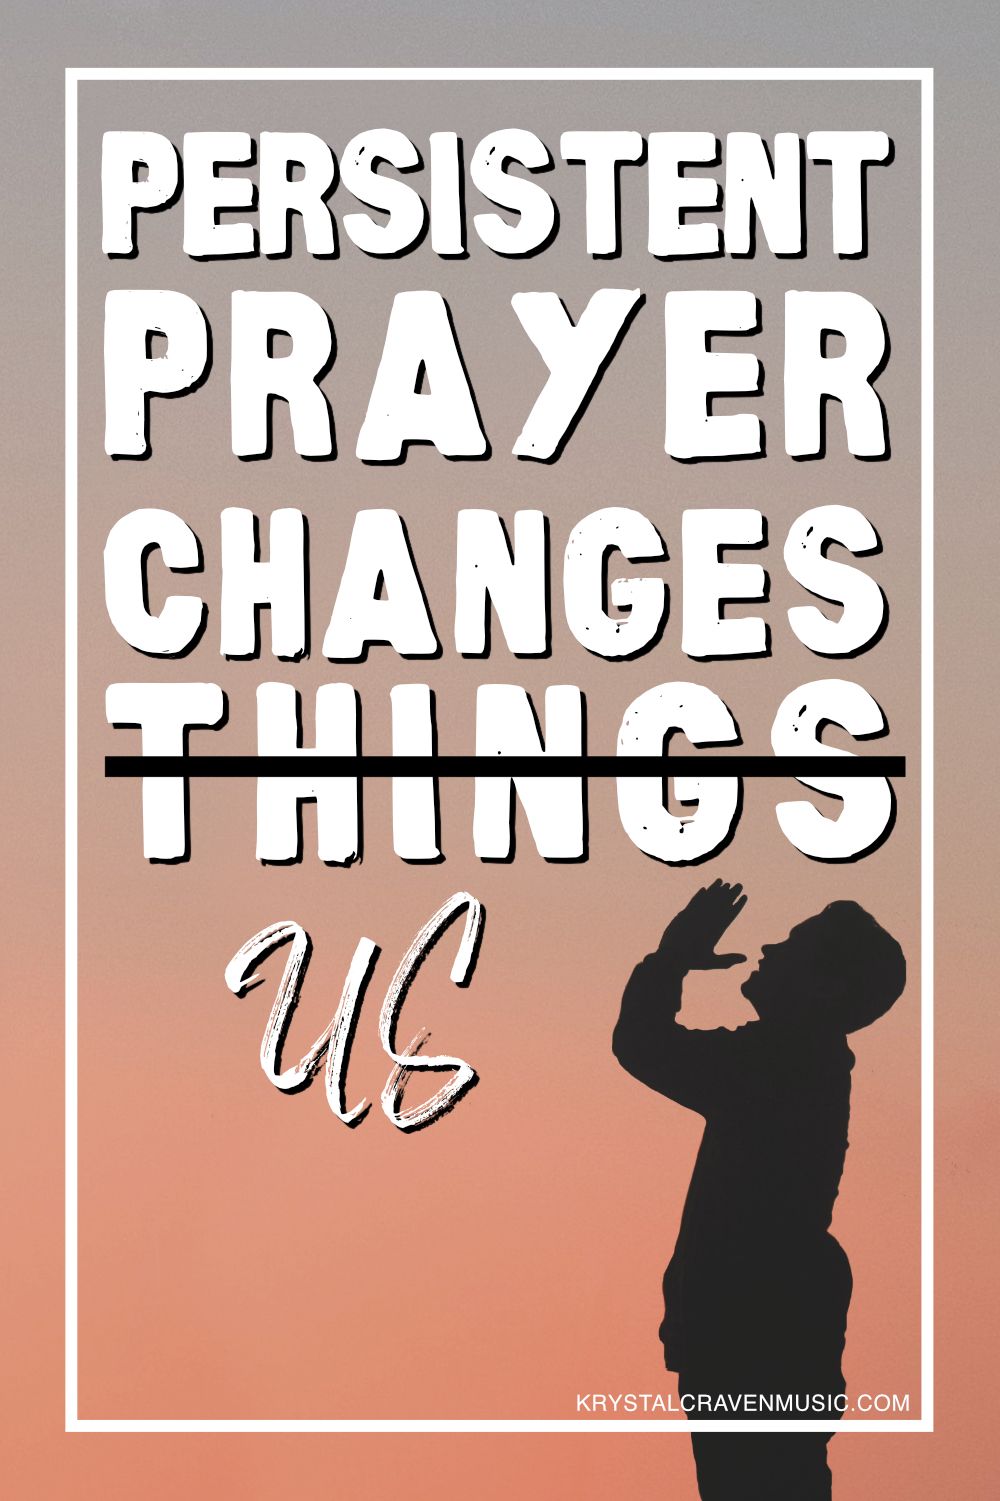 The title text "Persistent Prayer Changes Us" overlaying a profile silhoette of a man standing with his hands pressed together with his face towards the sky.